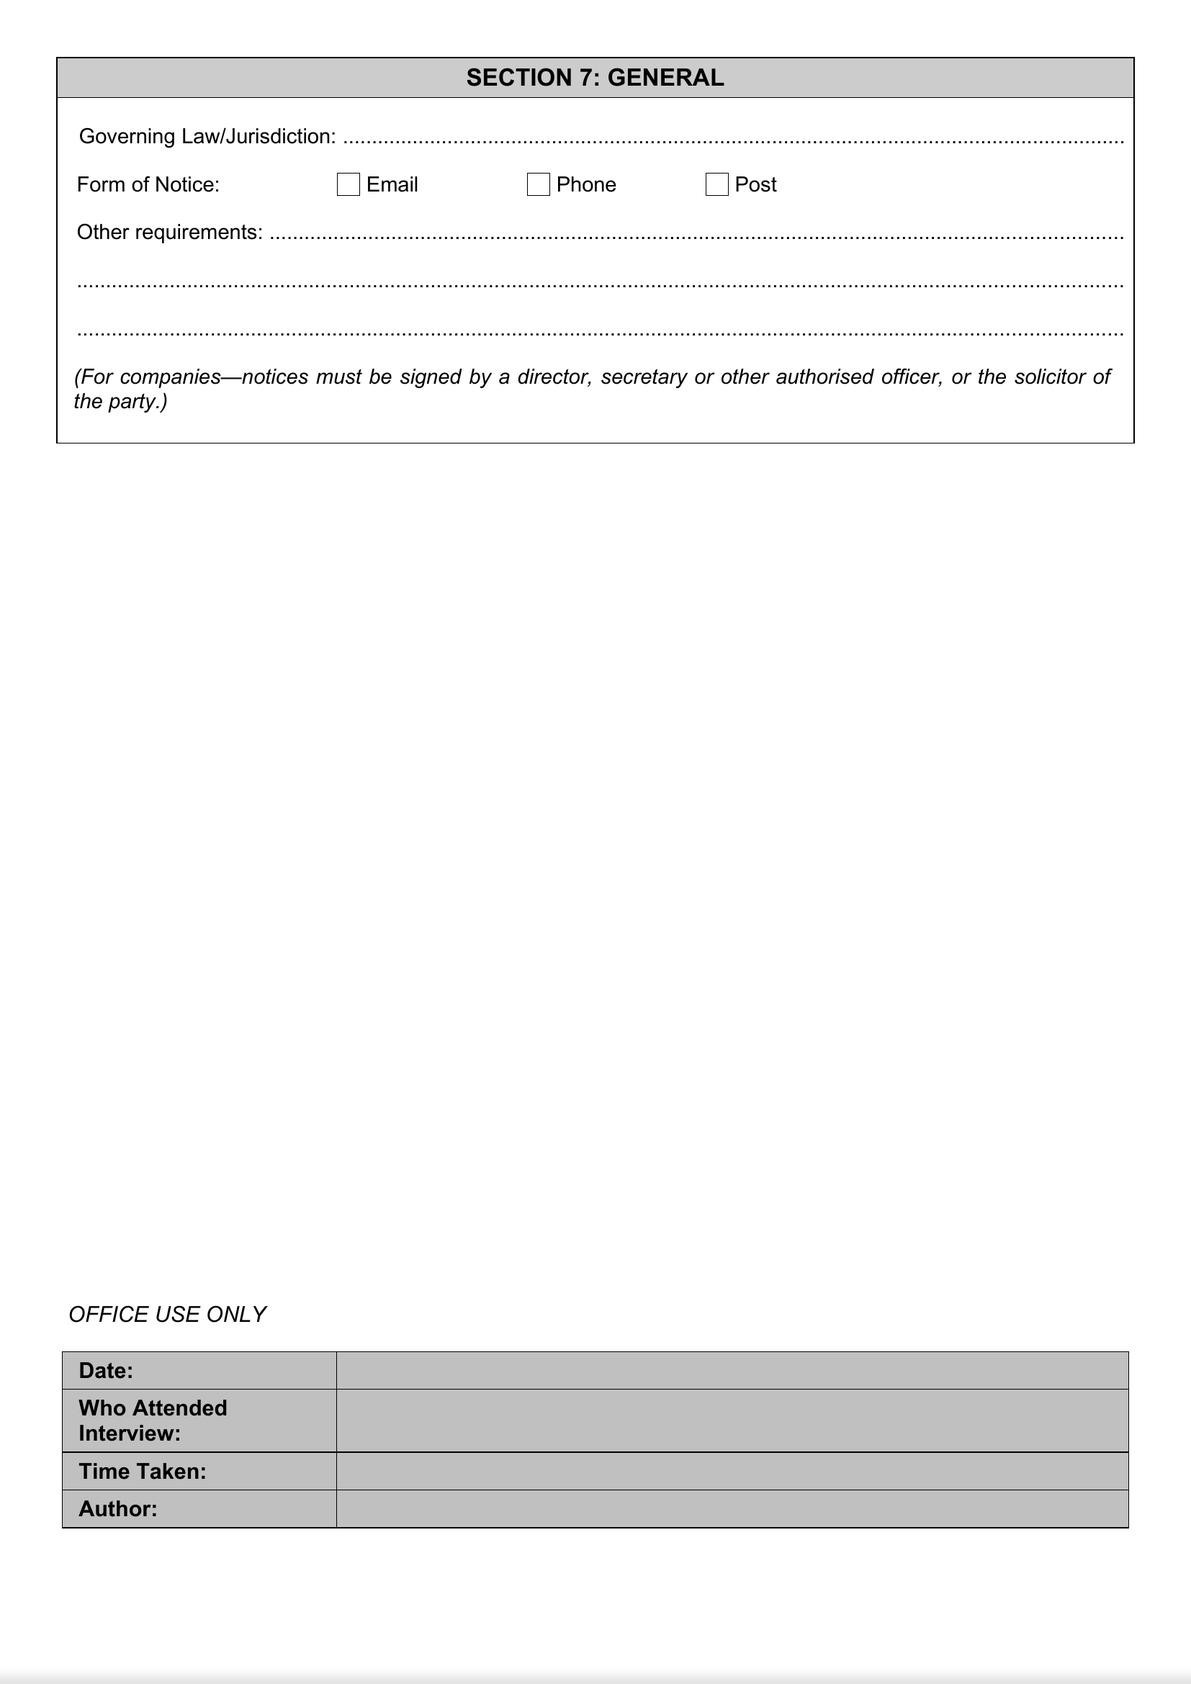 Website Terms and Conditions - Questionnaire for drafting-3